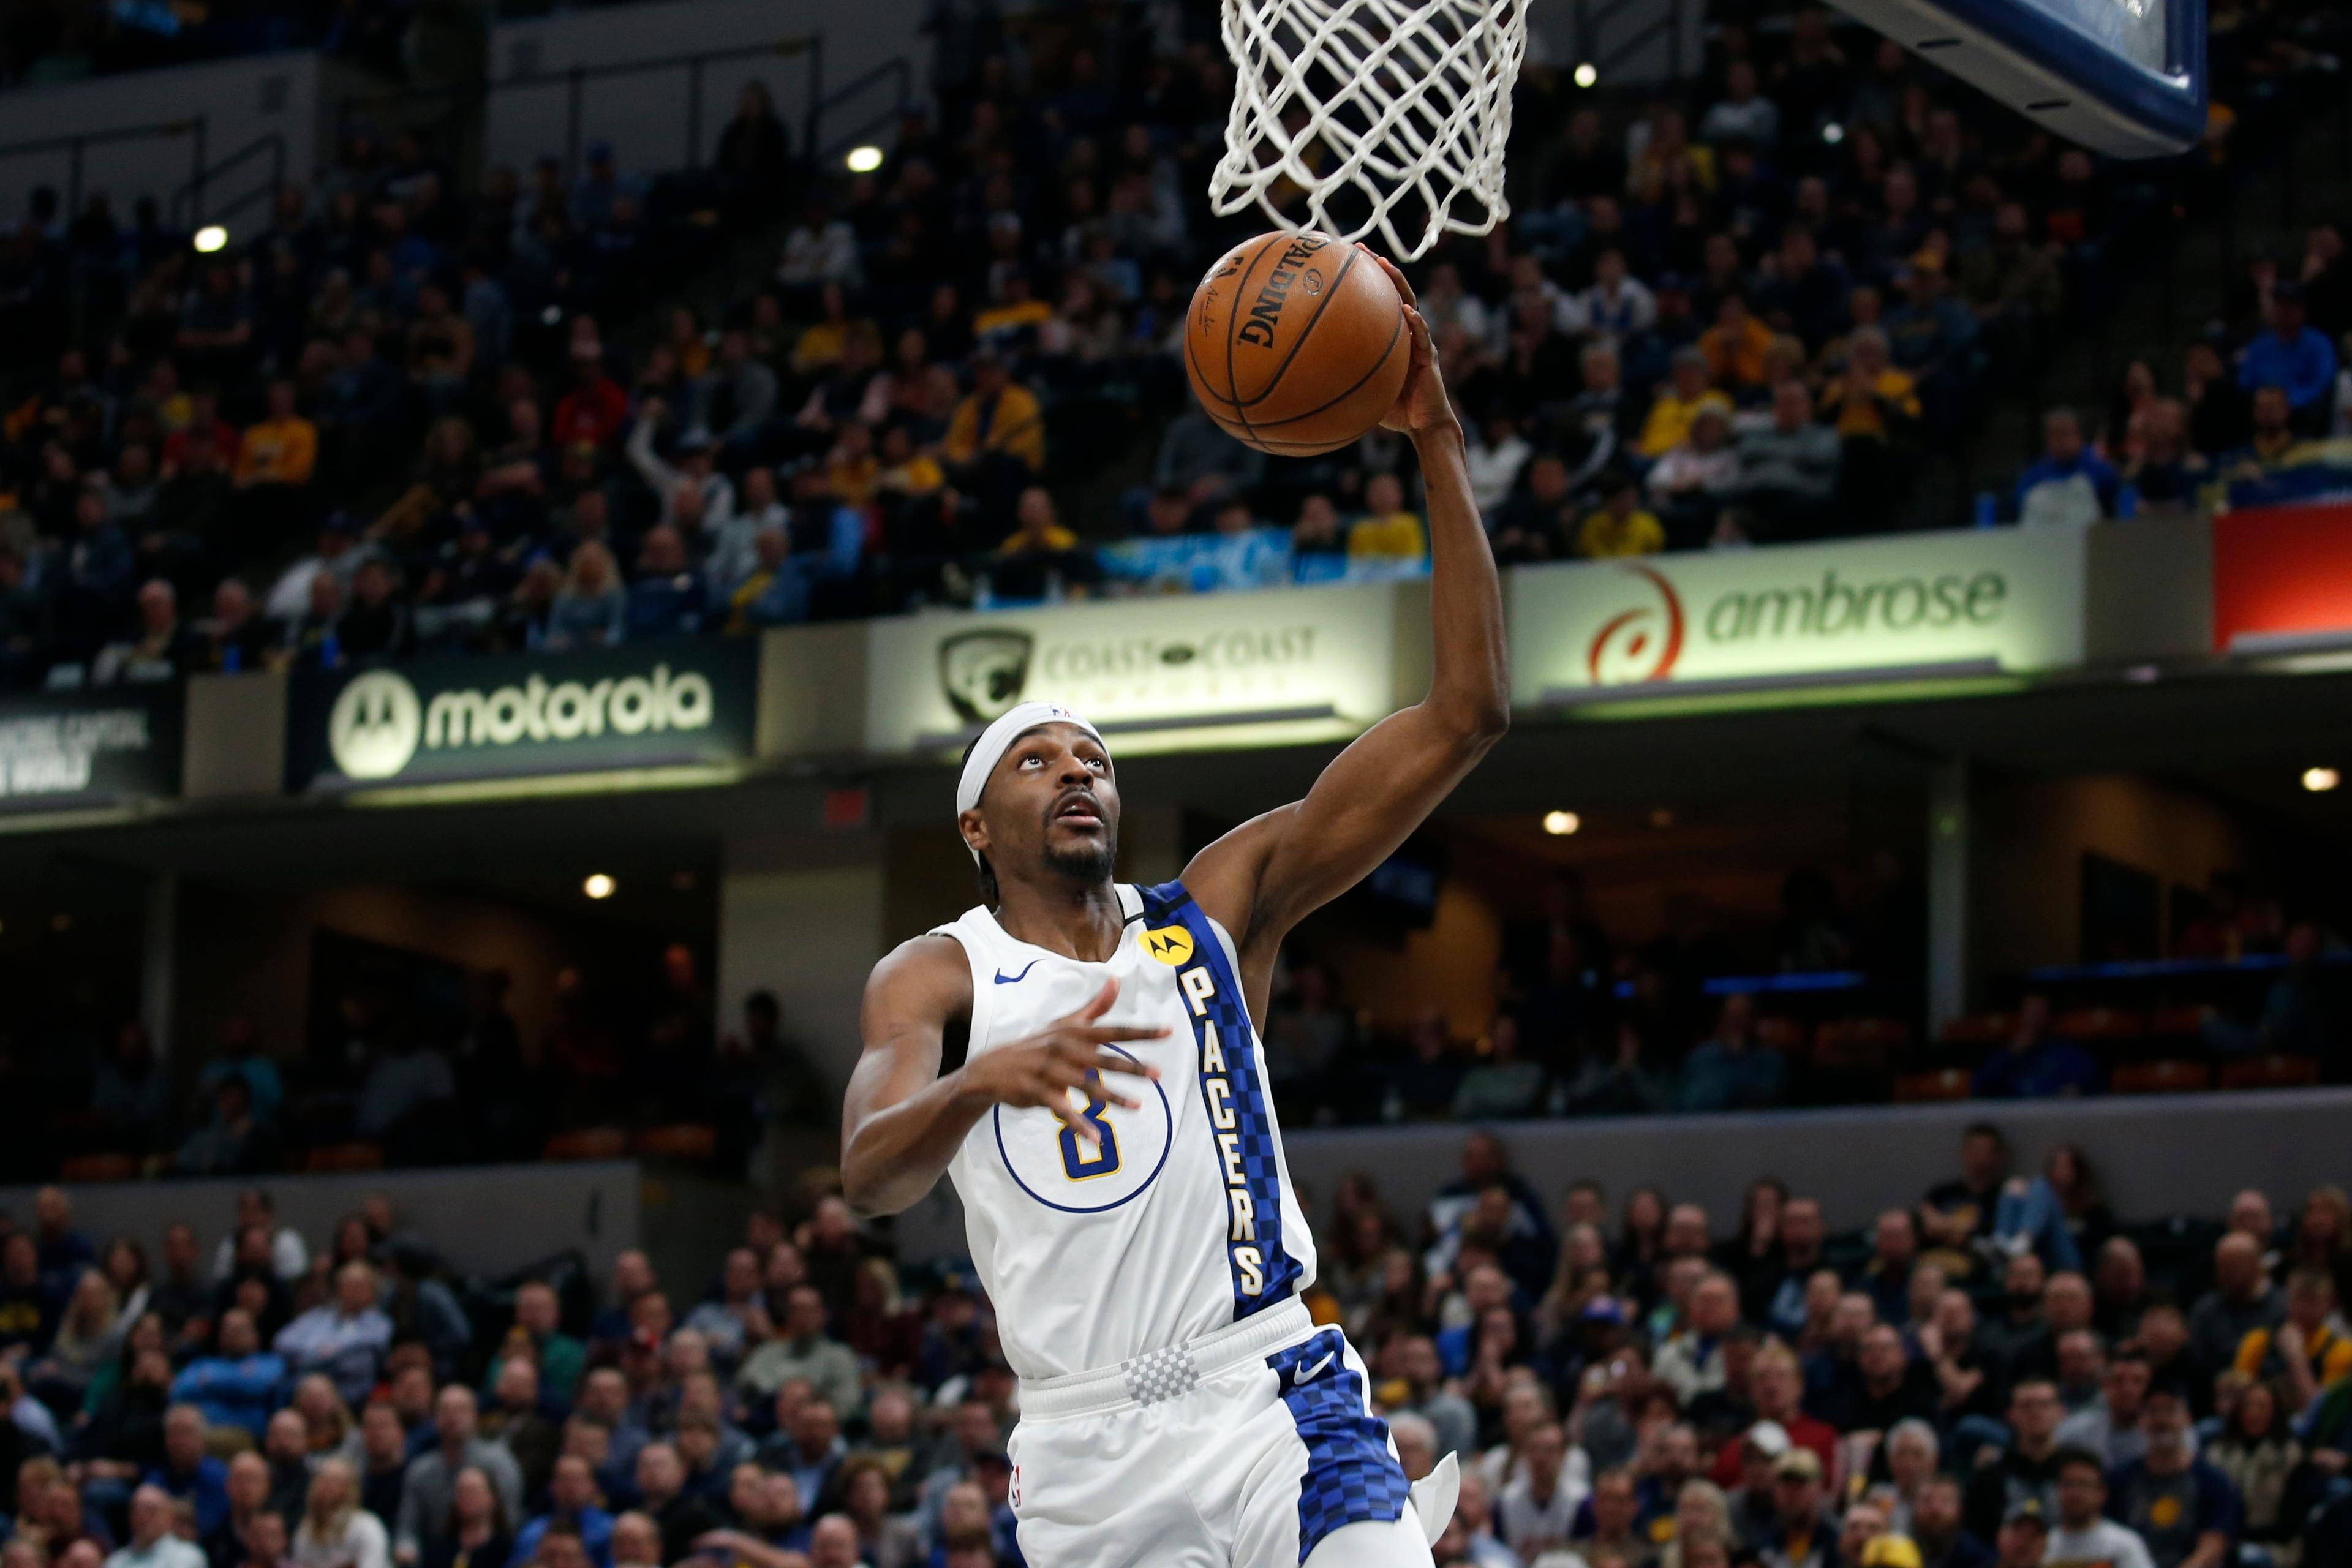 Feb 3, 2020; Indianapolis, Indiana, USA; Indiana Pacers guard Justin Holiday (8) goes up for a dunk against the Dallas Mavericks during the fourth quarter at Bankers Life Fieldhouse / Brian Spurlock-USA TODAY Sports